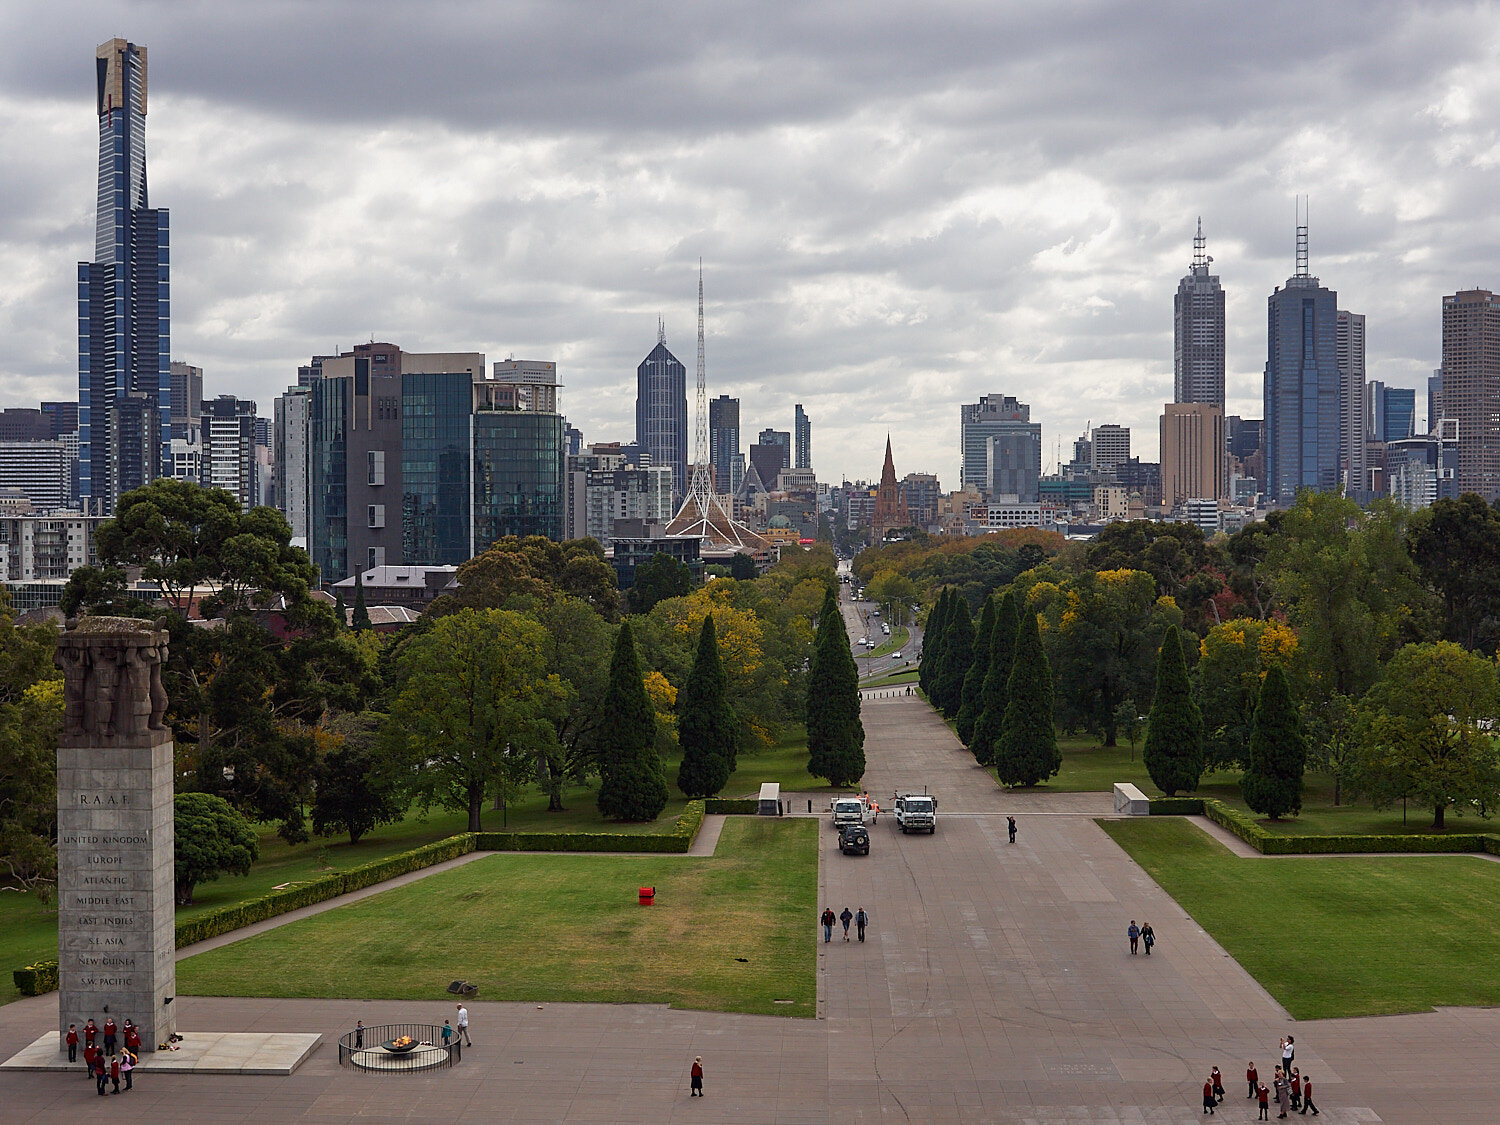 Melbourne Skyline from the Shrine of Remembrance